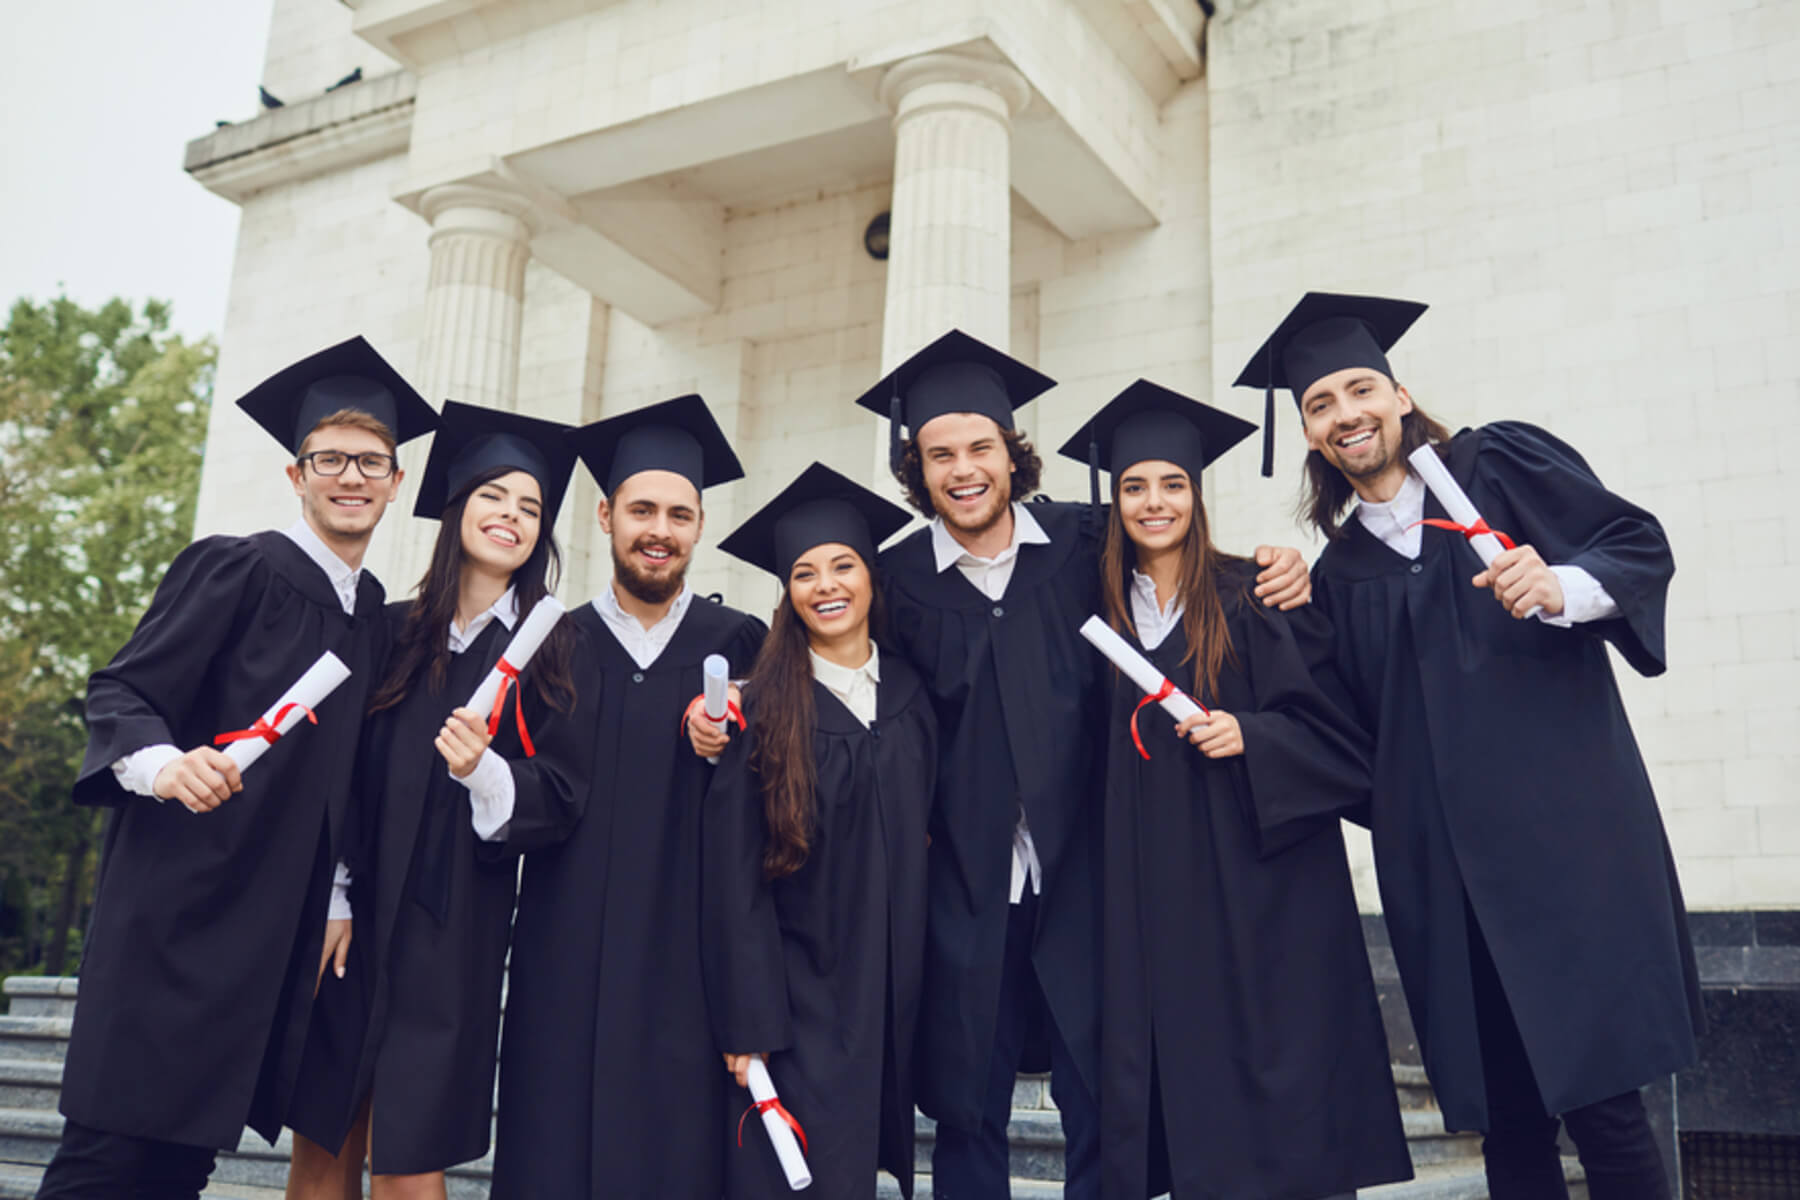 In this article, learn more about how Salesforce tools can help your higher education organization improve alumni engagement.